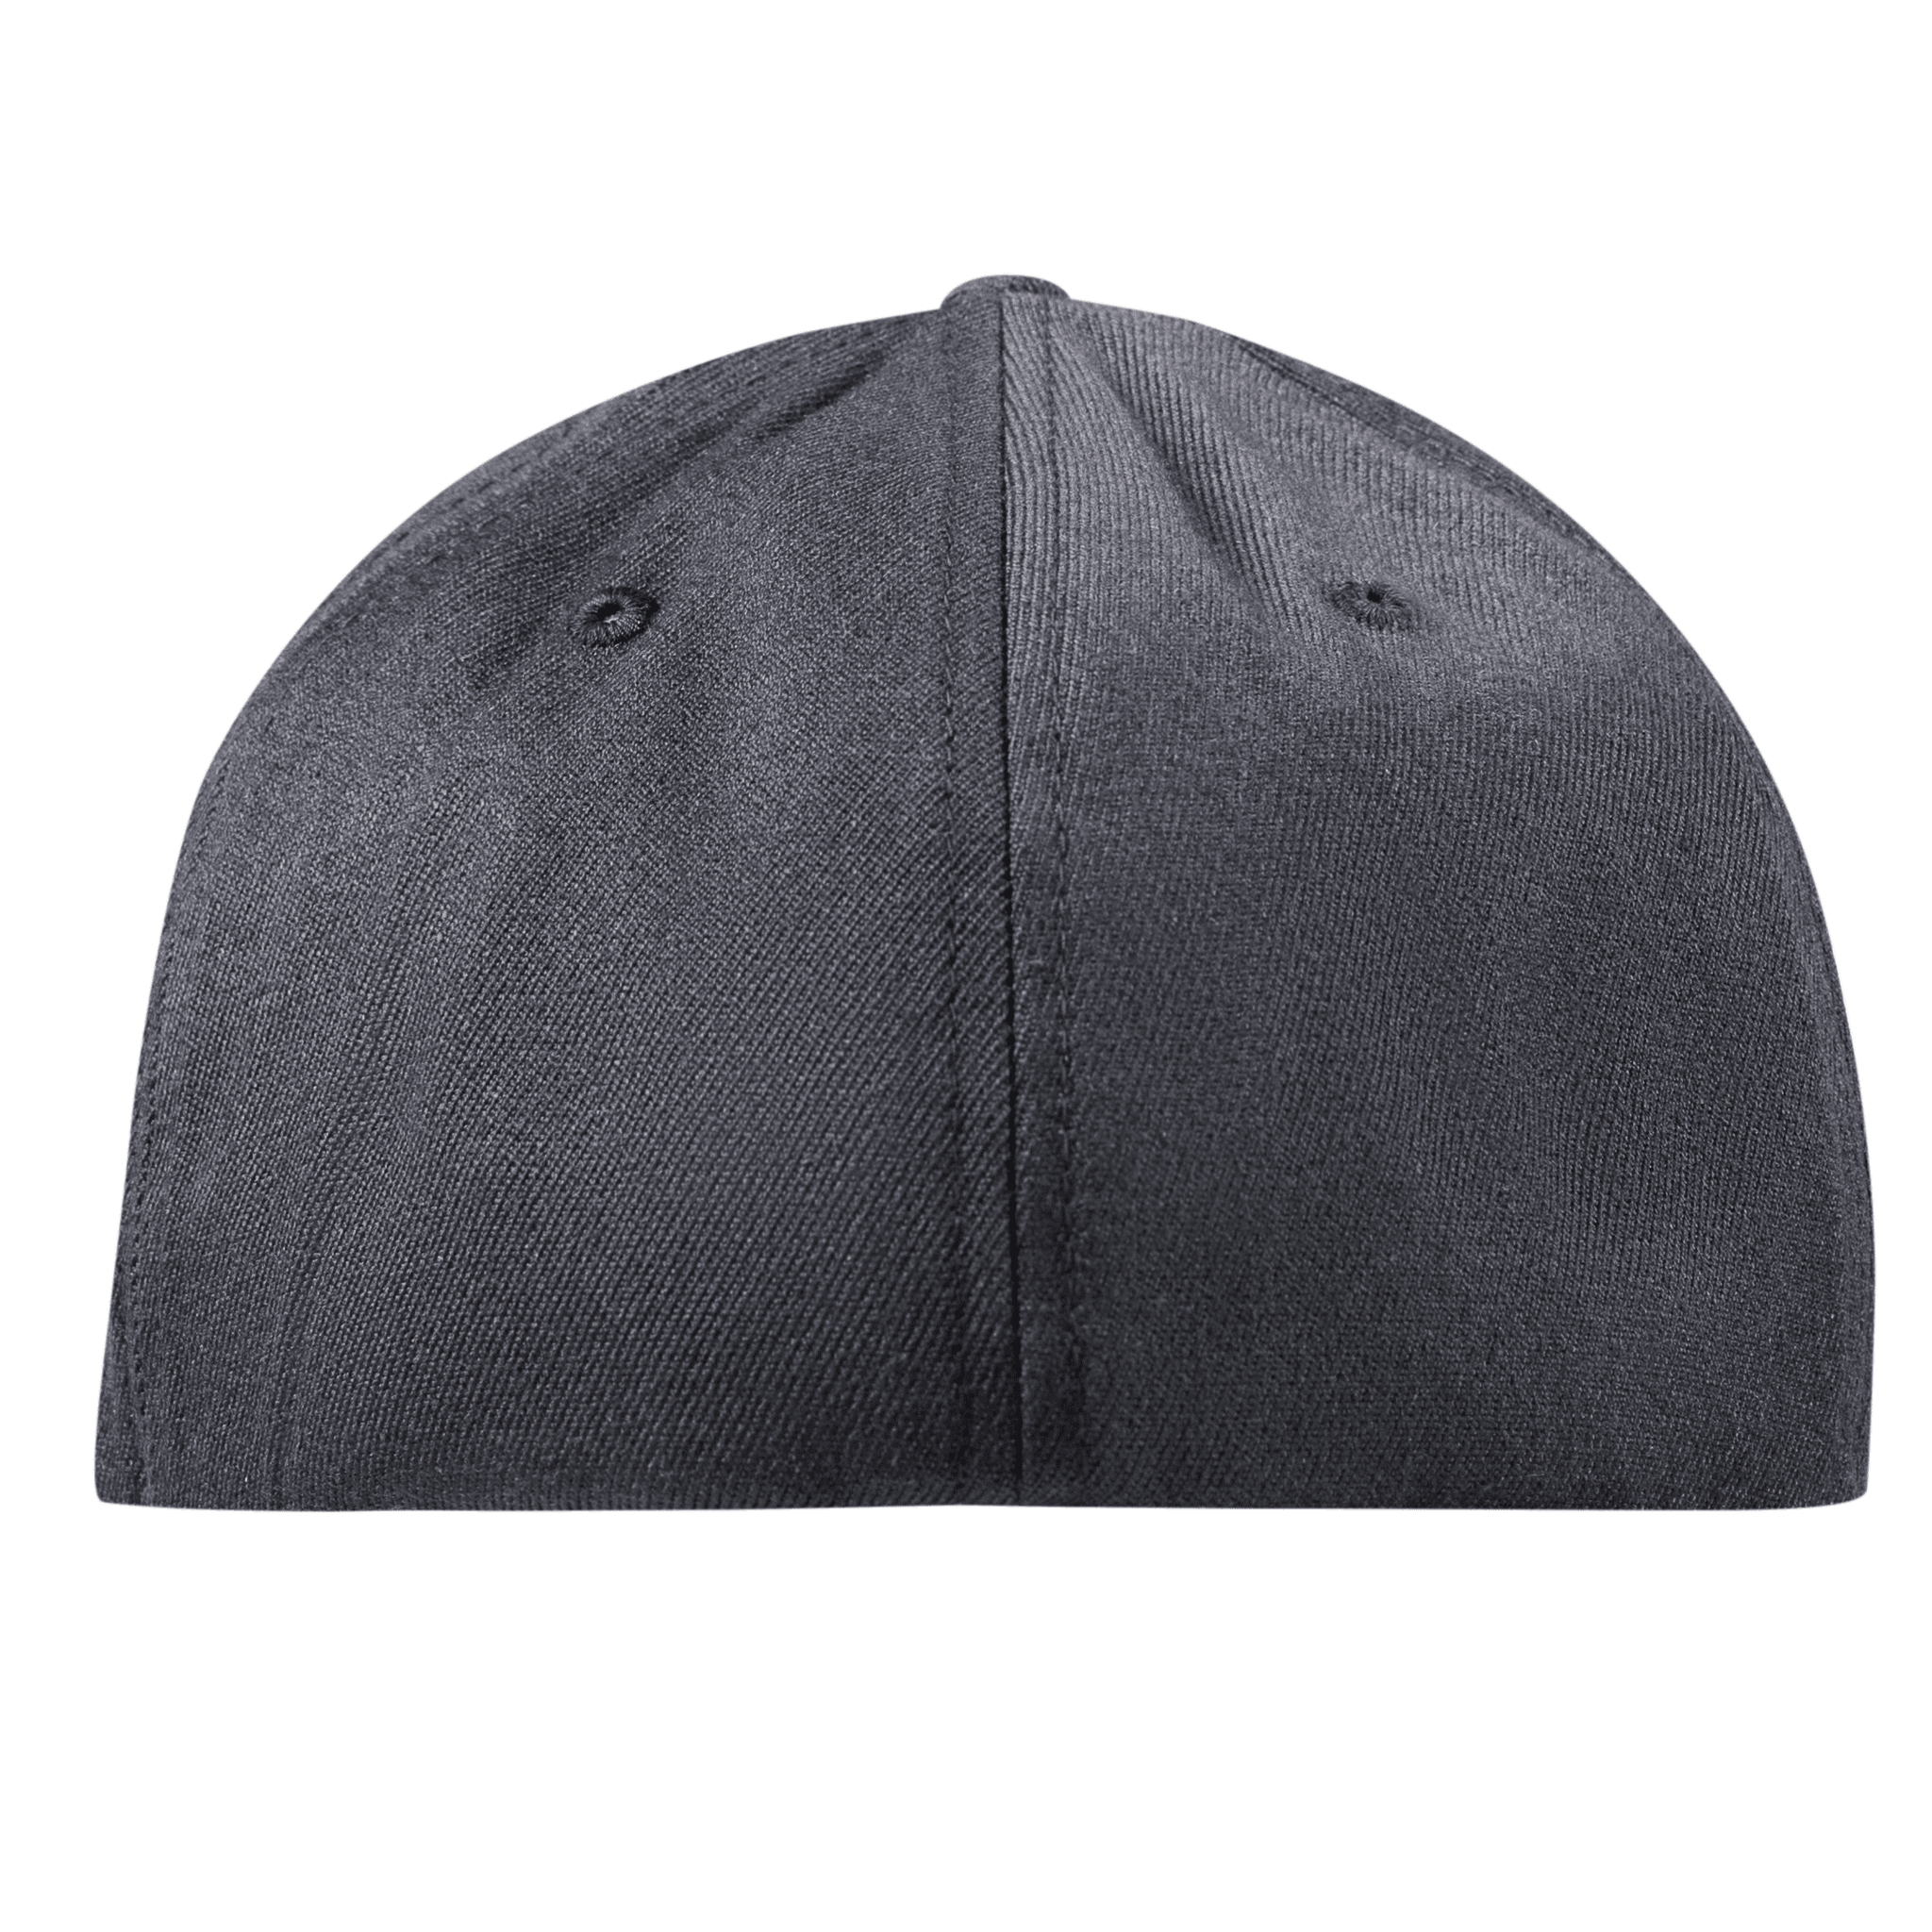 Wisconsin Vintage Flexfit Fitted Back Charcoal